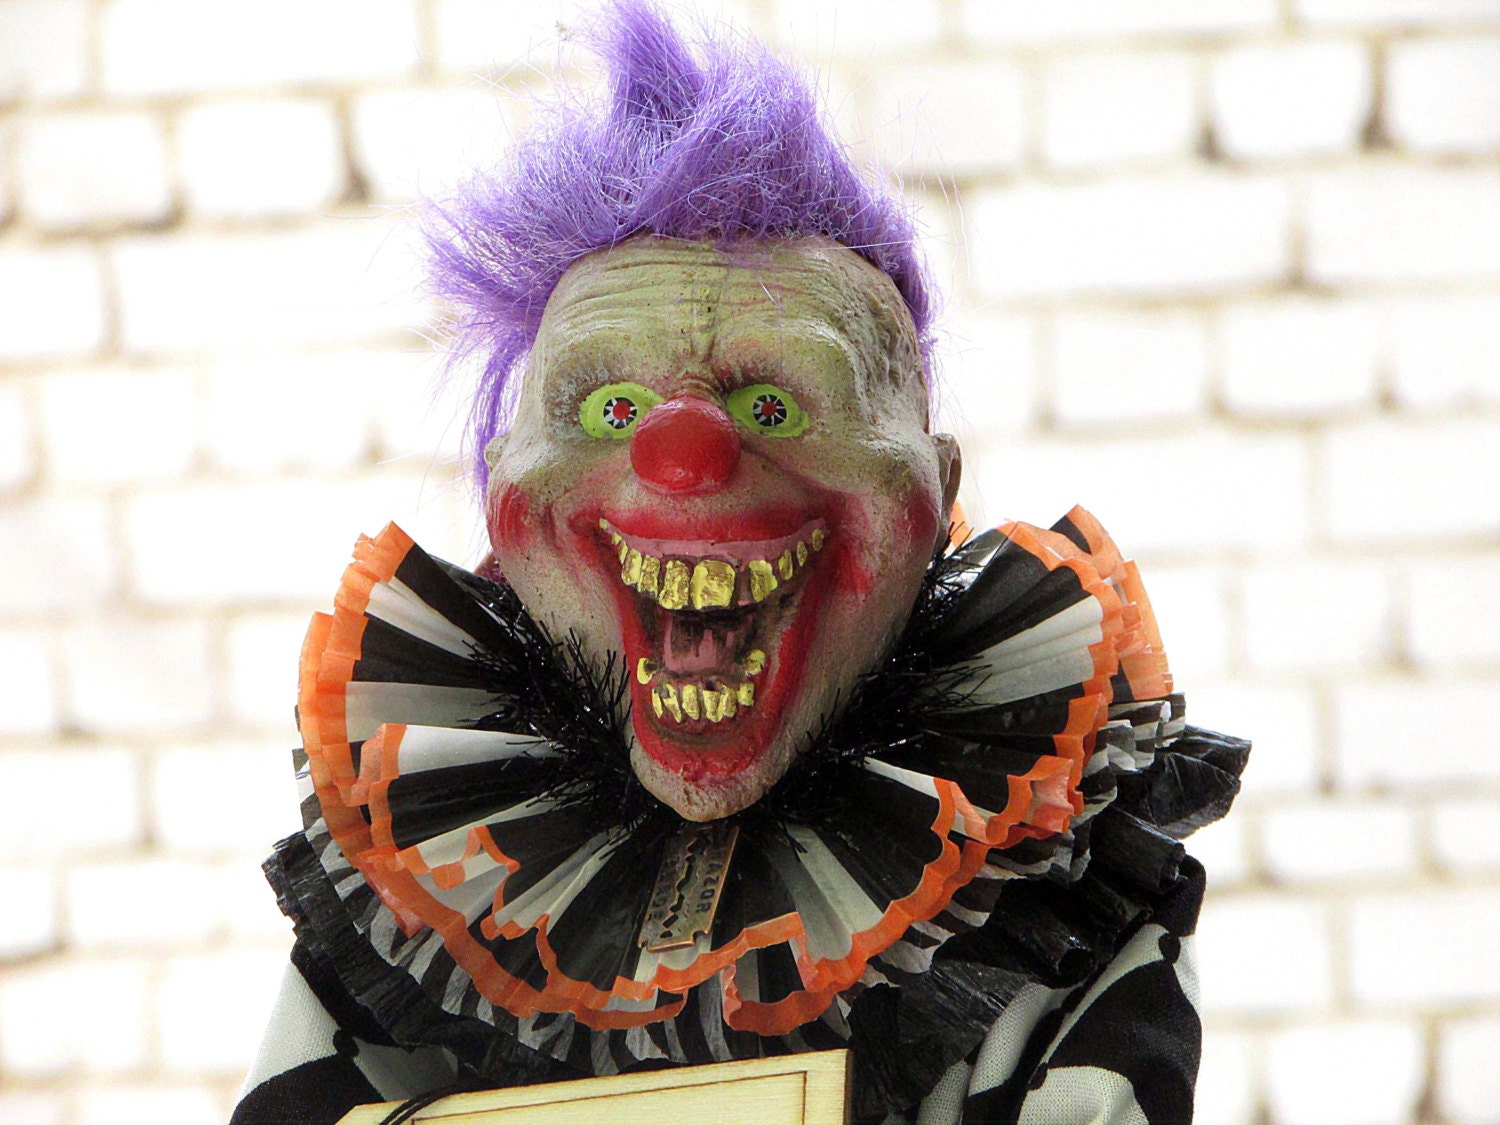 Scary Clown Black and White Clown Doll Harlequin Creepy